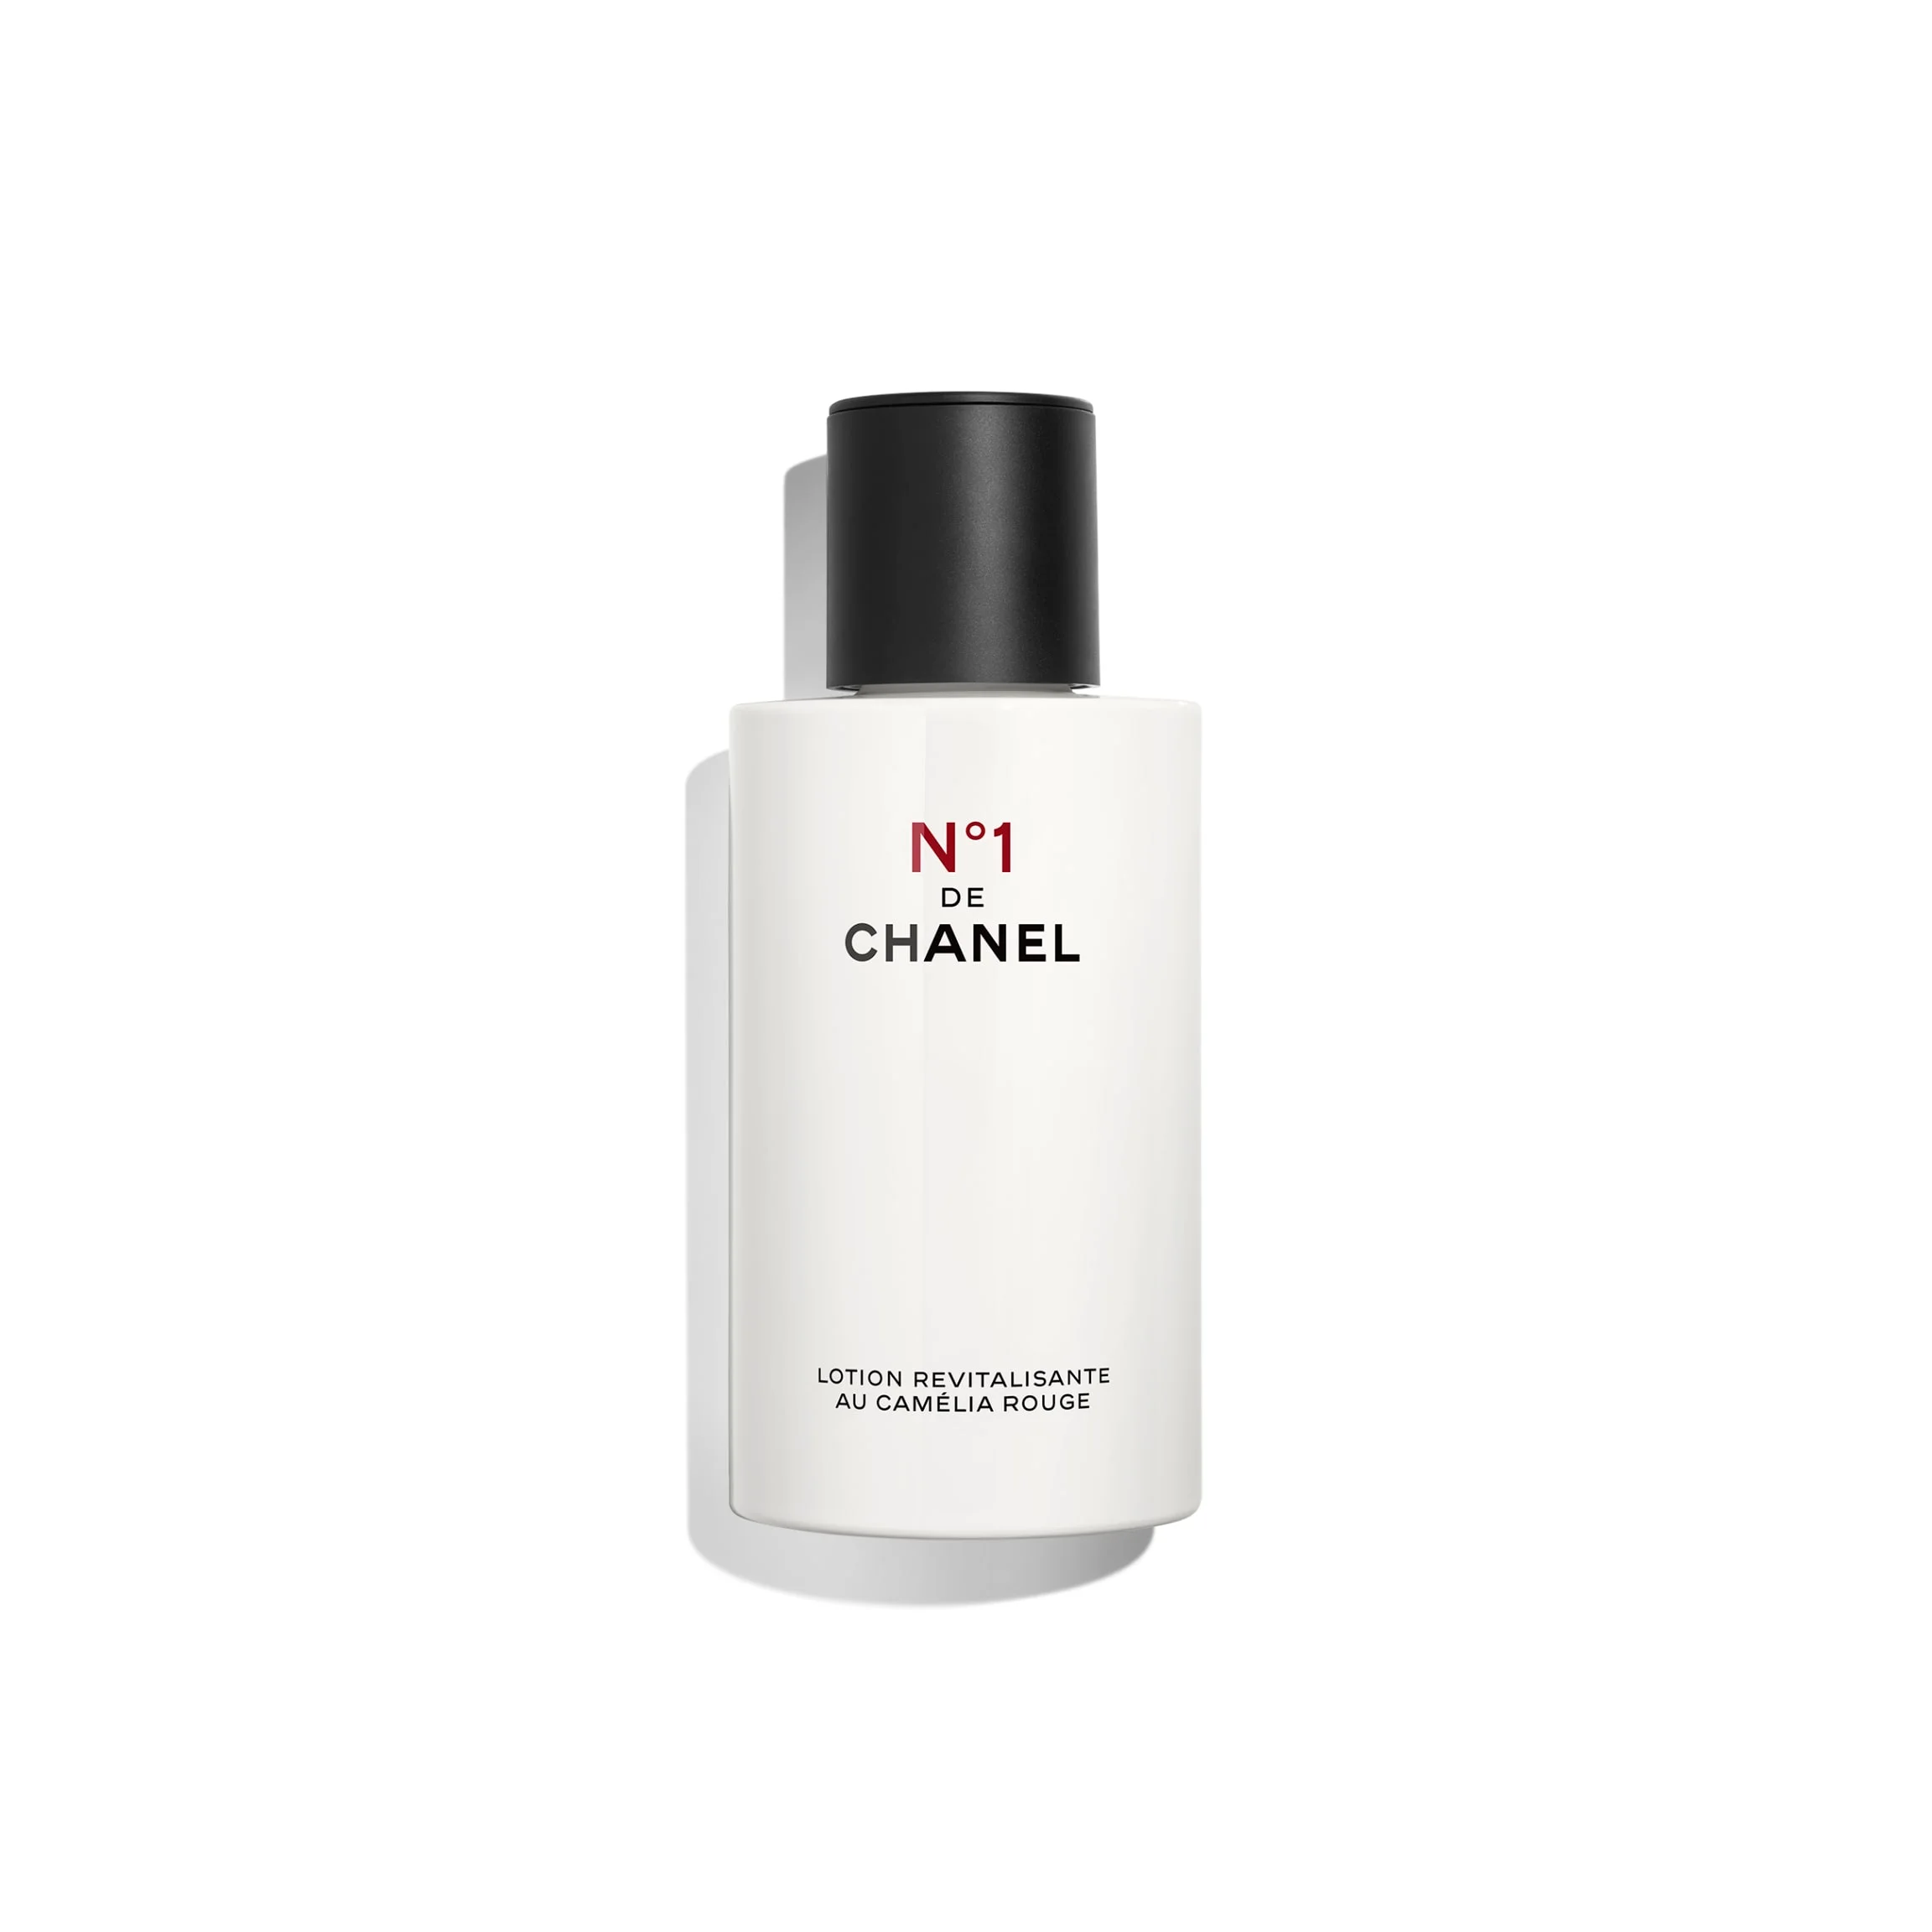 Face Lotion Chanel Lotion Purete from Chanel Brand in the Shopping Center  on January 15, 2020 at Russia, Tatarstan, Kazan, Editorial Image - Image of  dior, face: 176780285